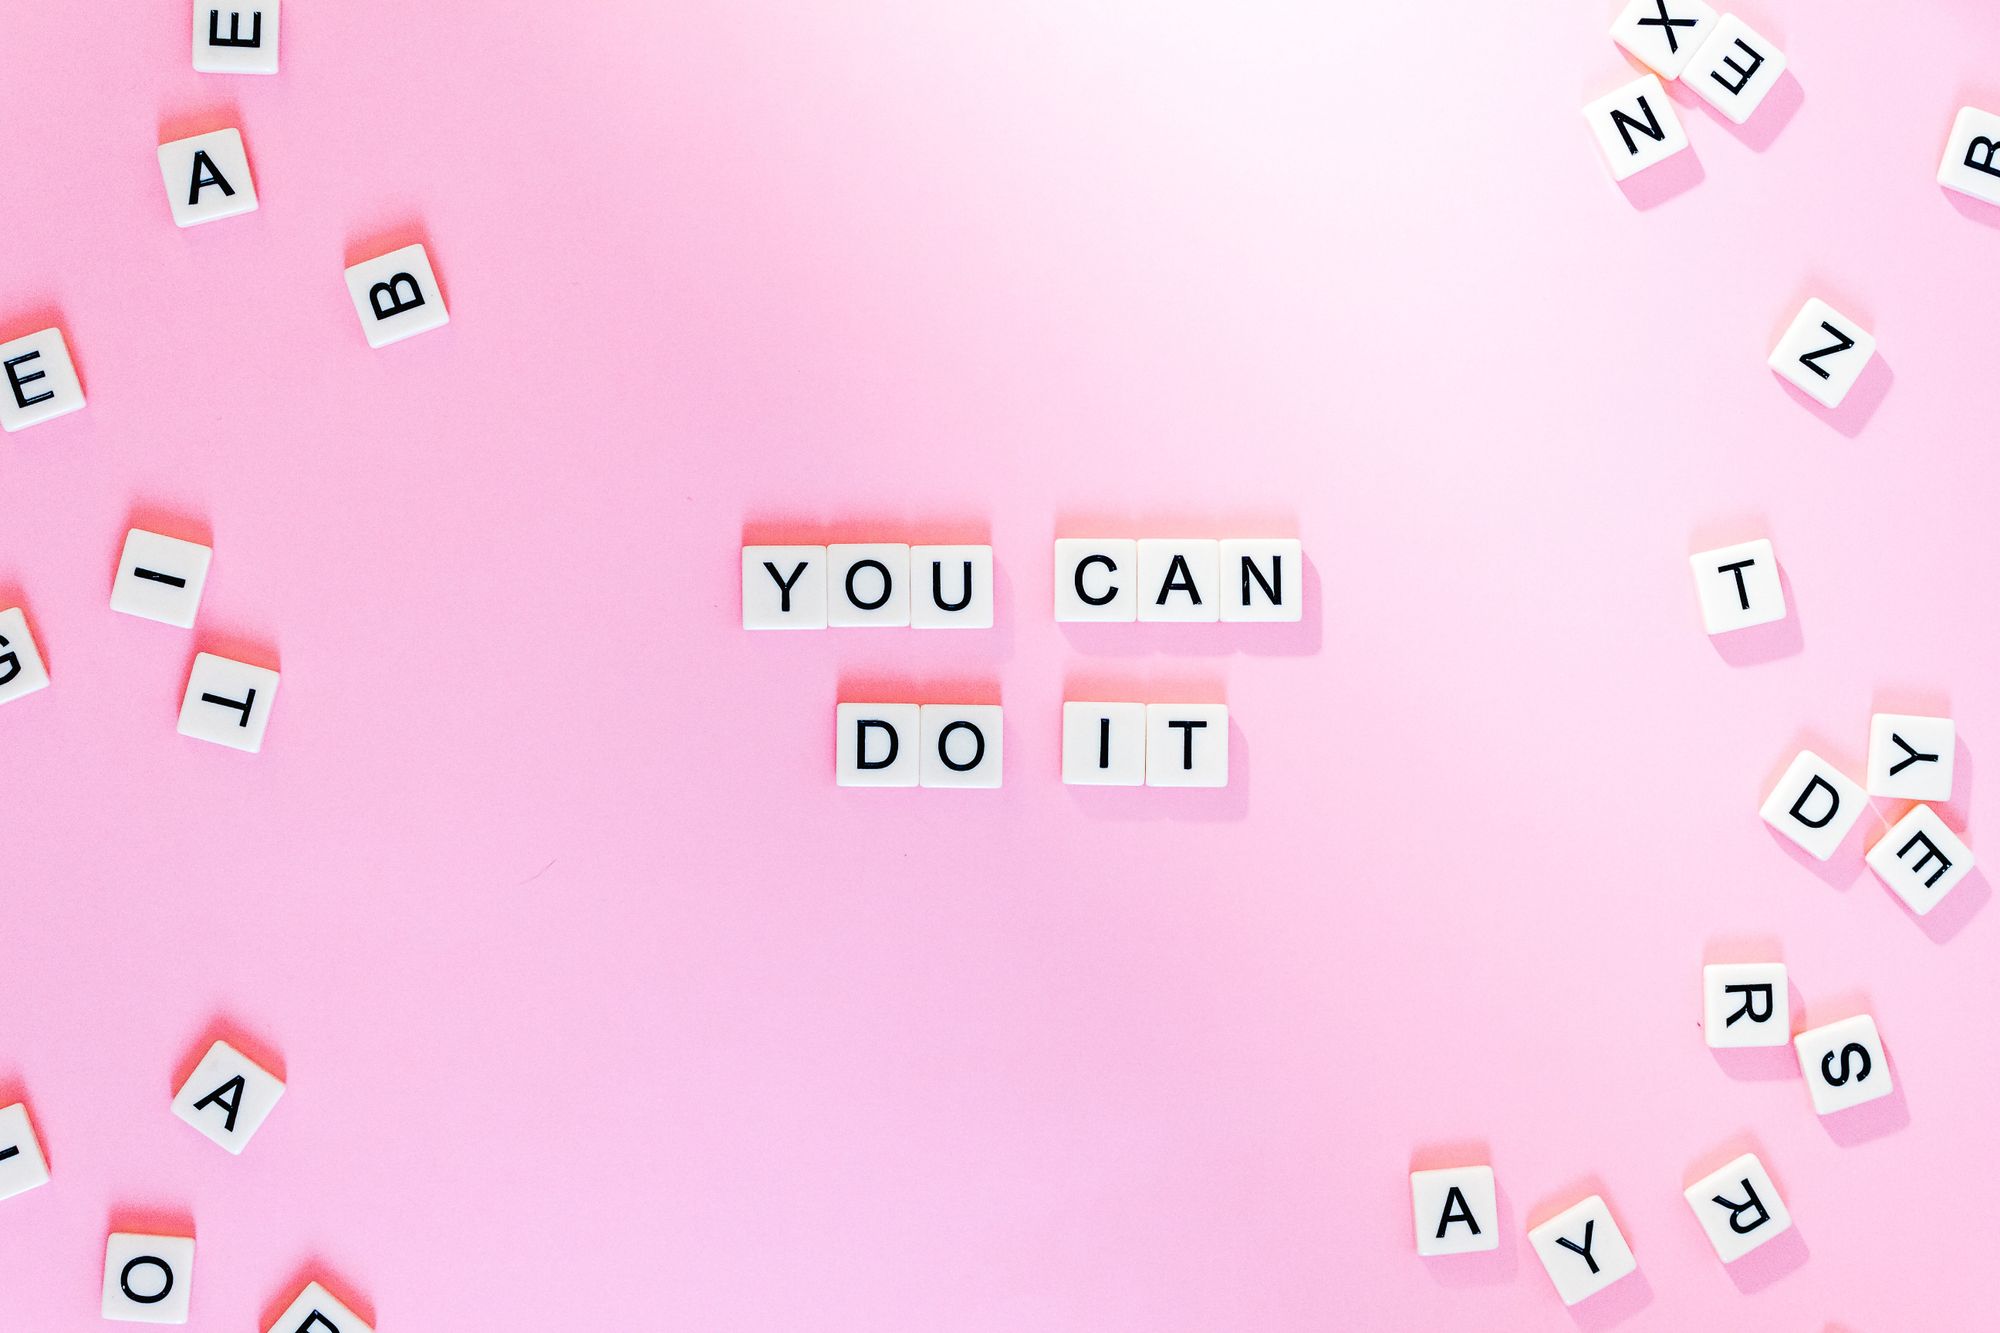 Stock photos of scrabble letters spelling, "You can do it".